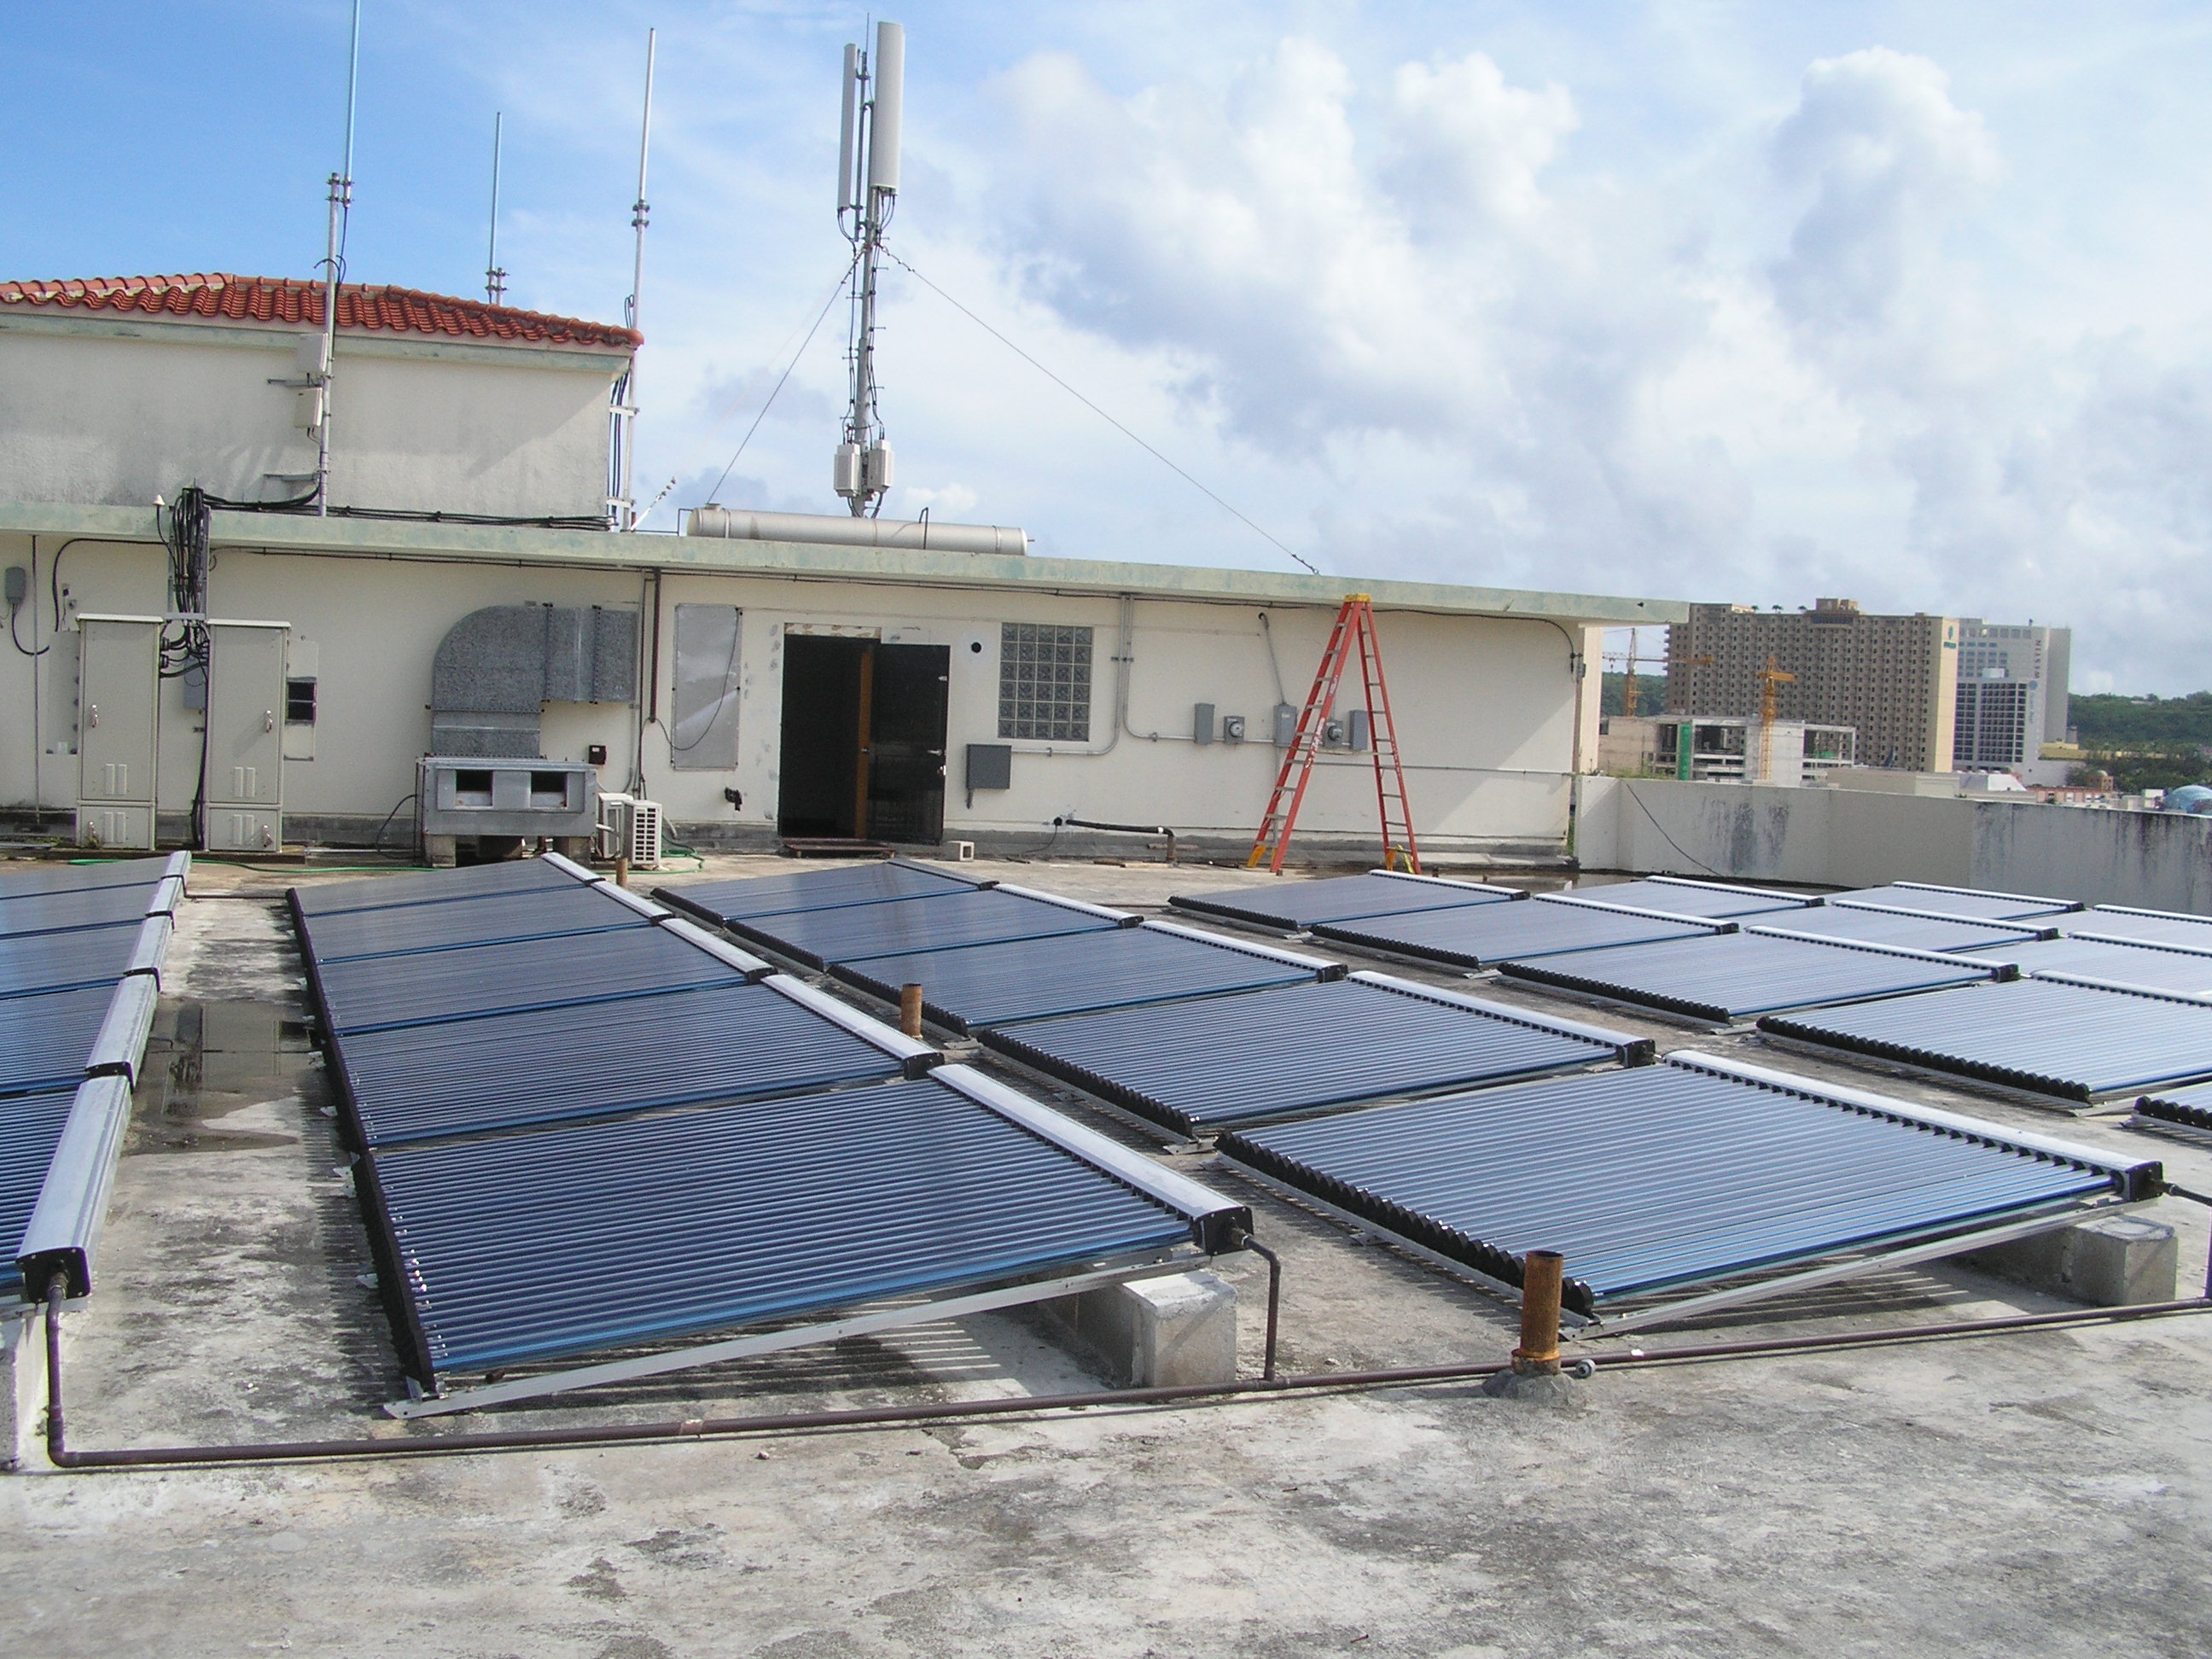 Why use a solar water heating system for hotel